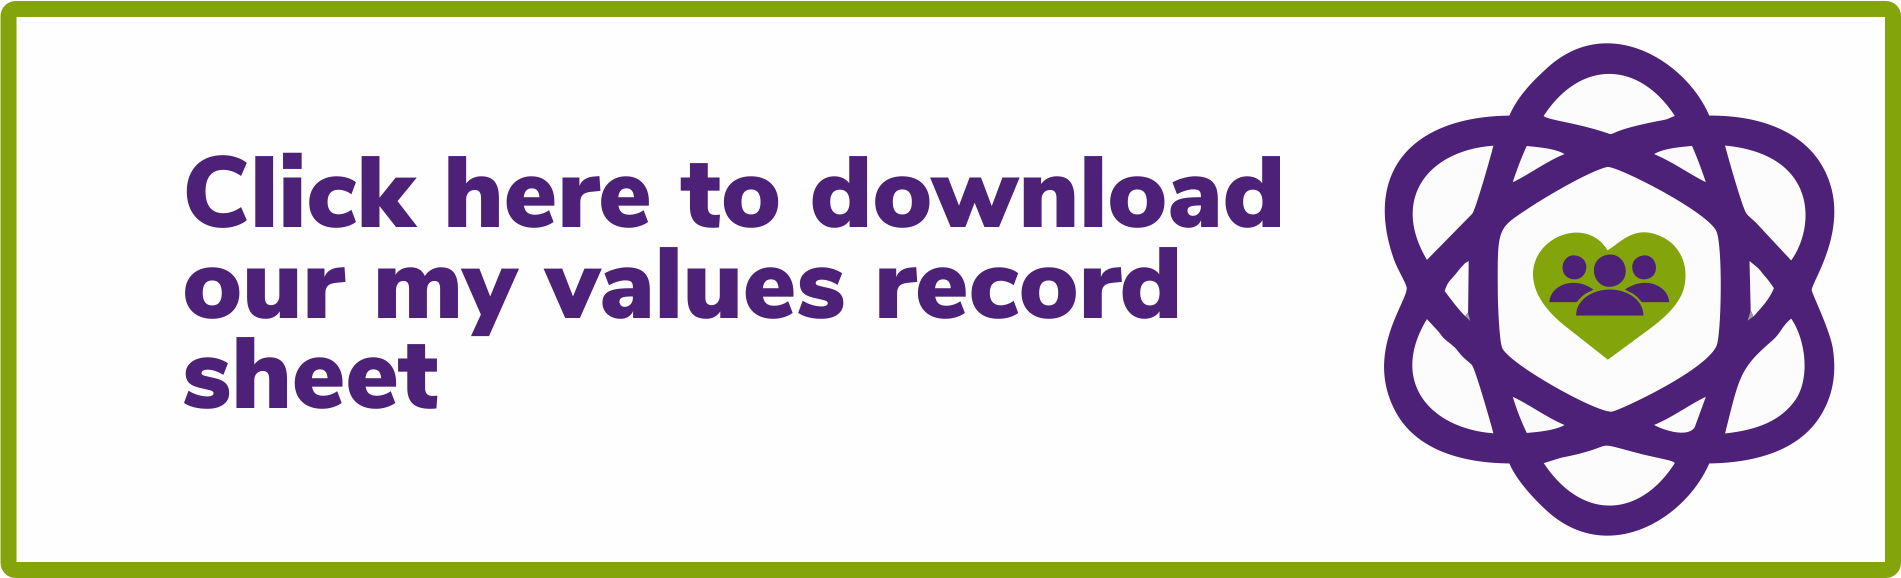 Click here to download our my values record sheet